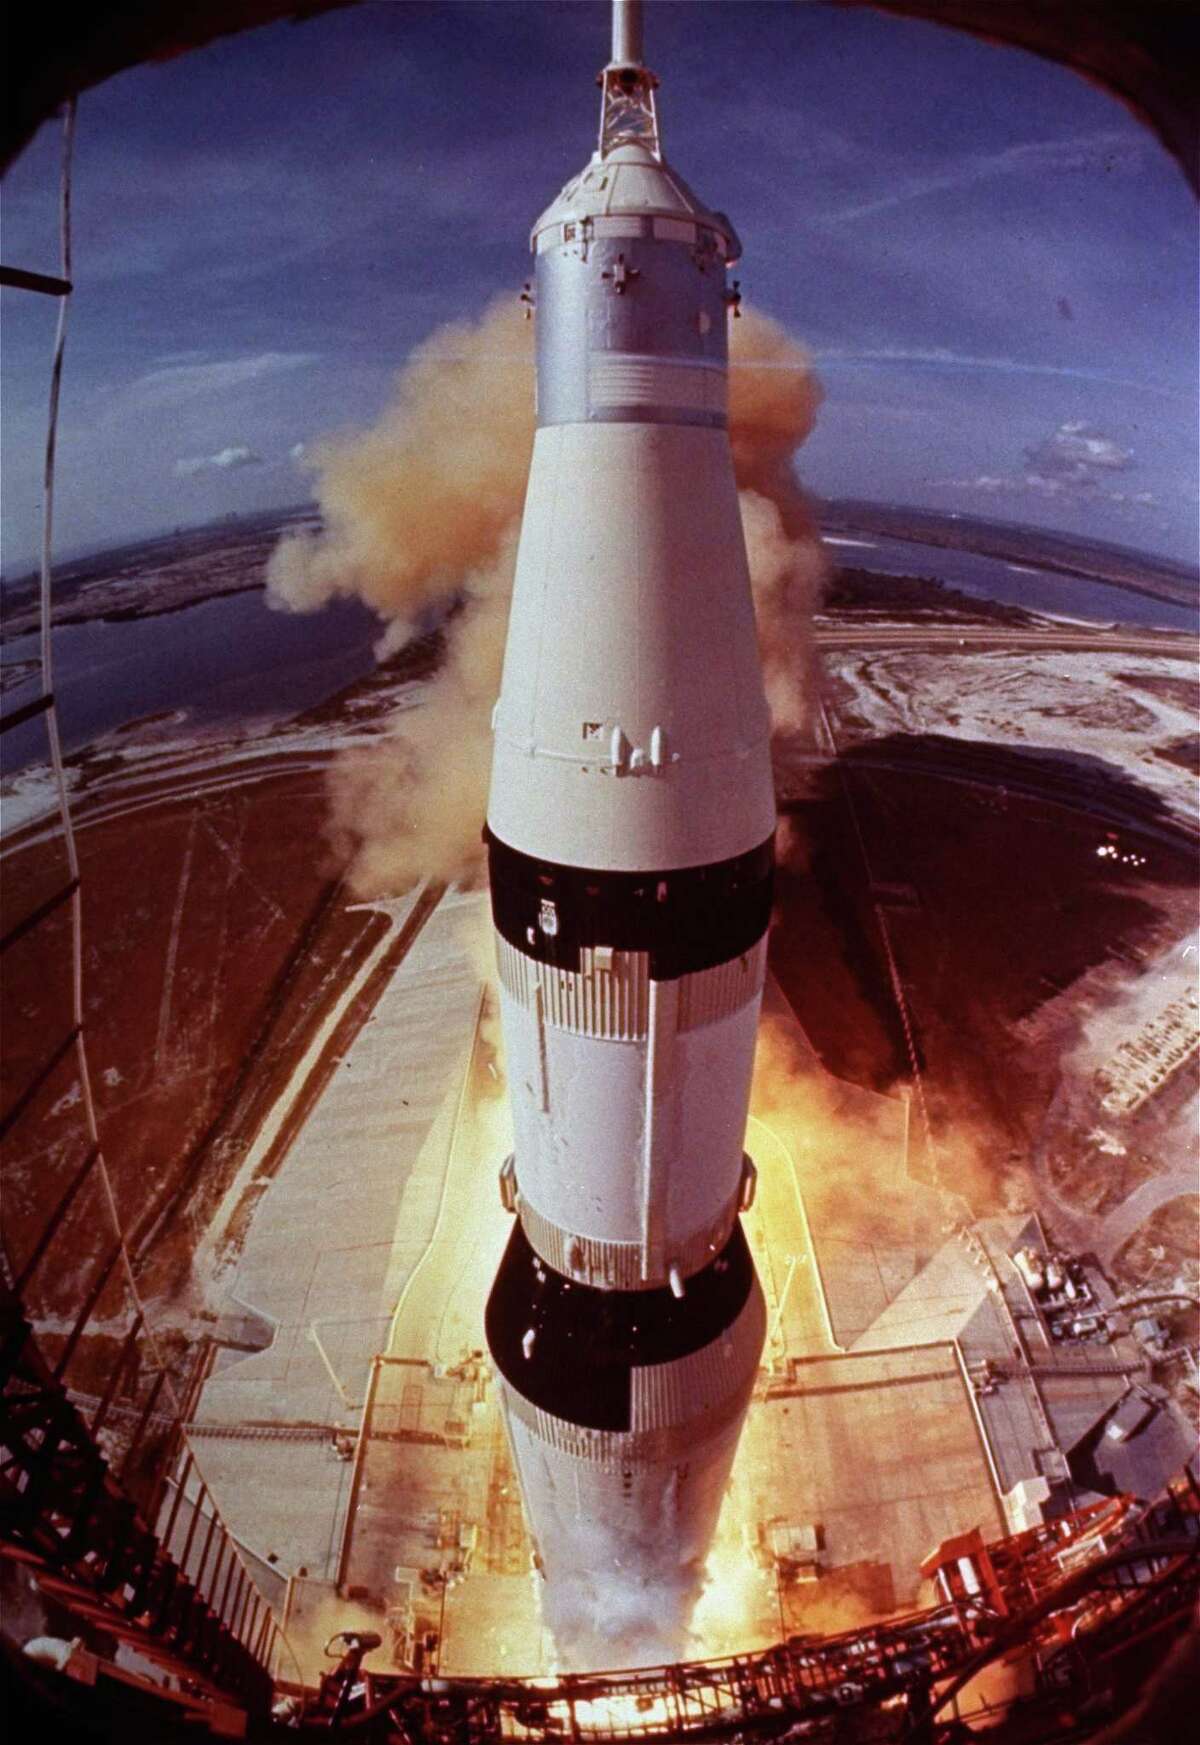 In this July 16, 1969, file photo, the Saturn V rocket that launched Neil Armstrong, Buzz Aldrin and Michael Collins on their Apollo 11 moon mission lifts off at Cape Kennedy, Fla.